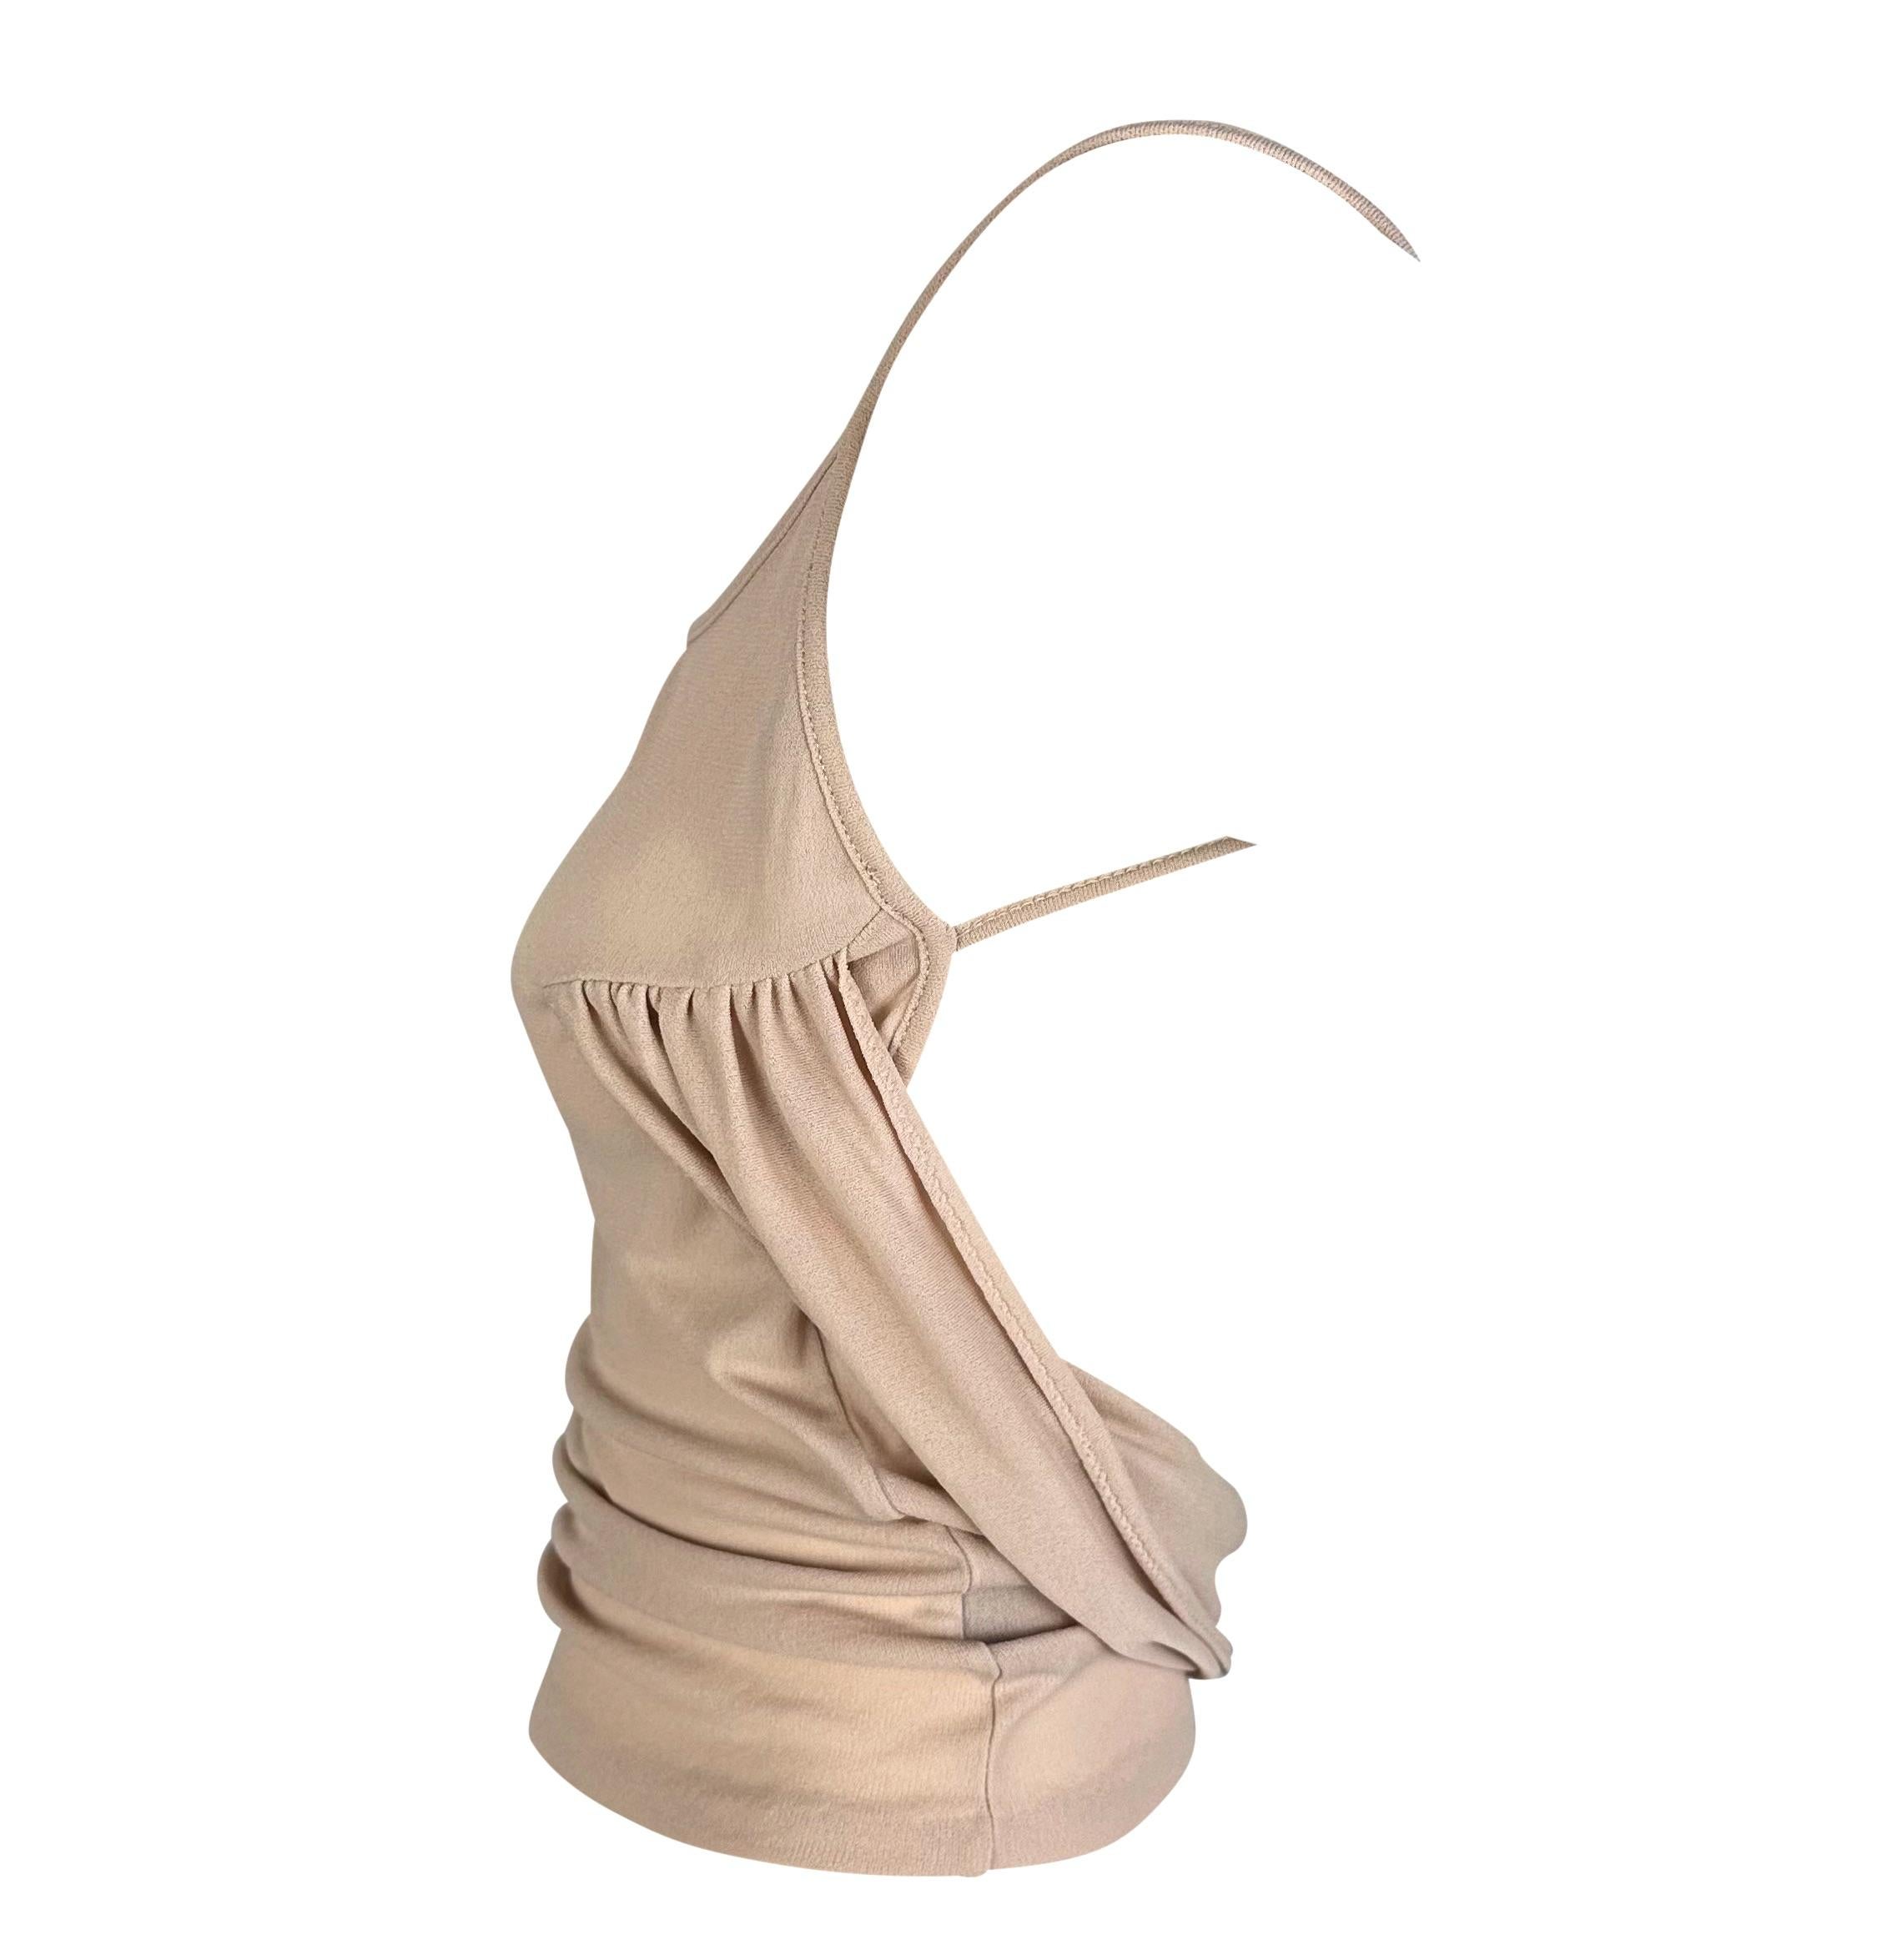 Presenting a fabulous beige Gucci tank top, designed by Tom Ford. From the early 2000s, this incredible ruched top is made complete with an exposed back accented with masterful draping. Add this effortlessly chic and sexy top to your